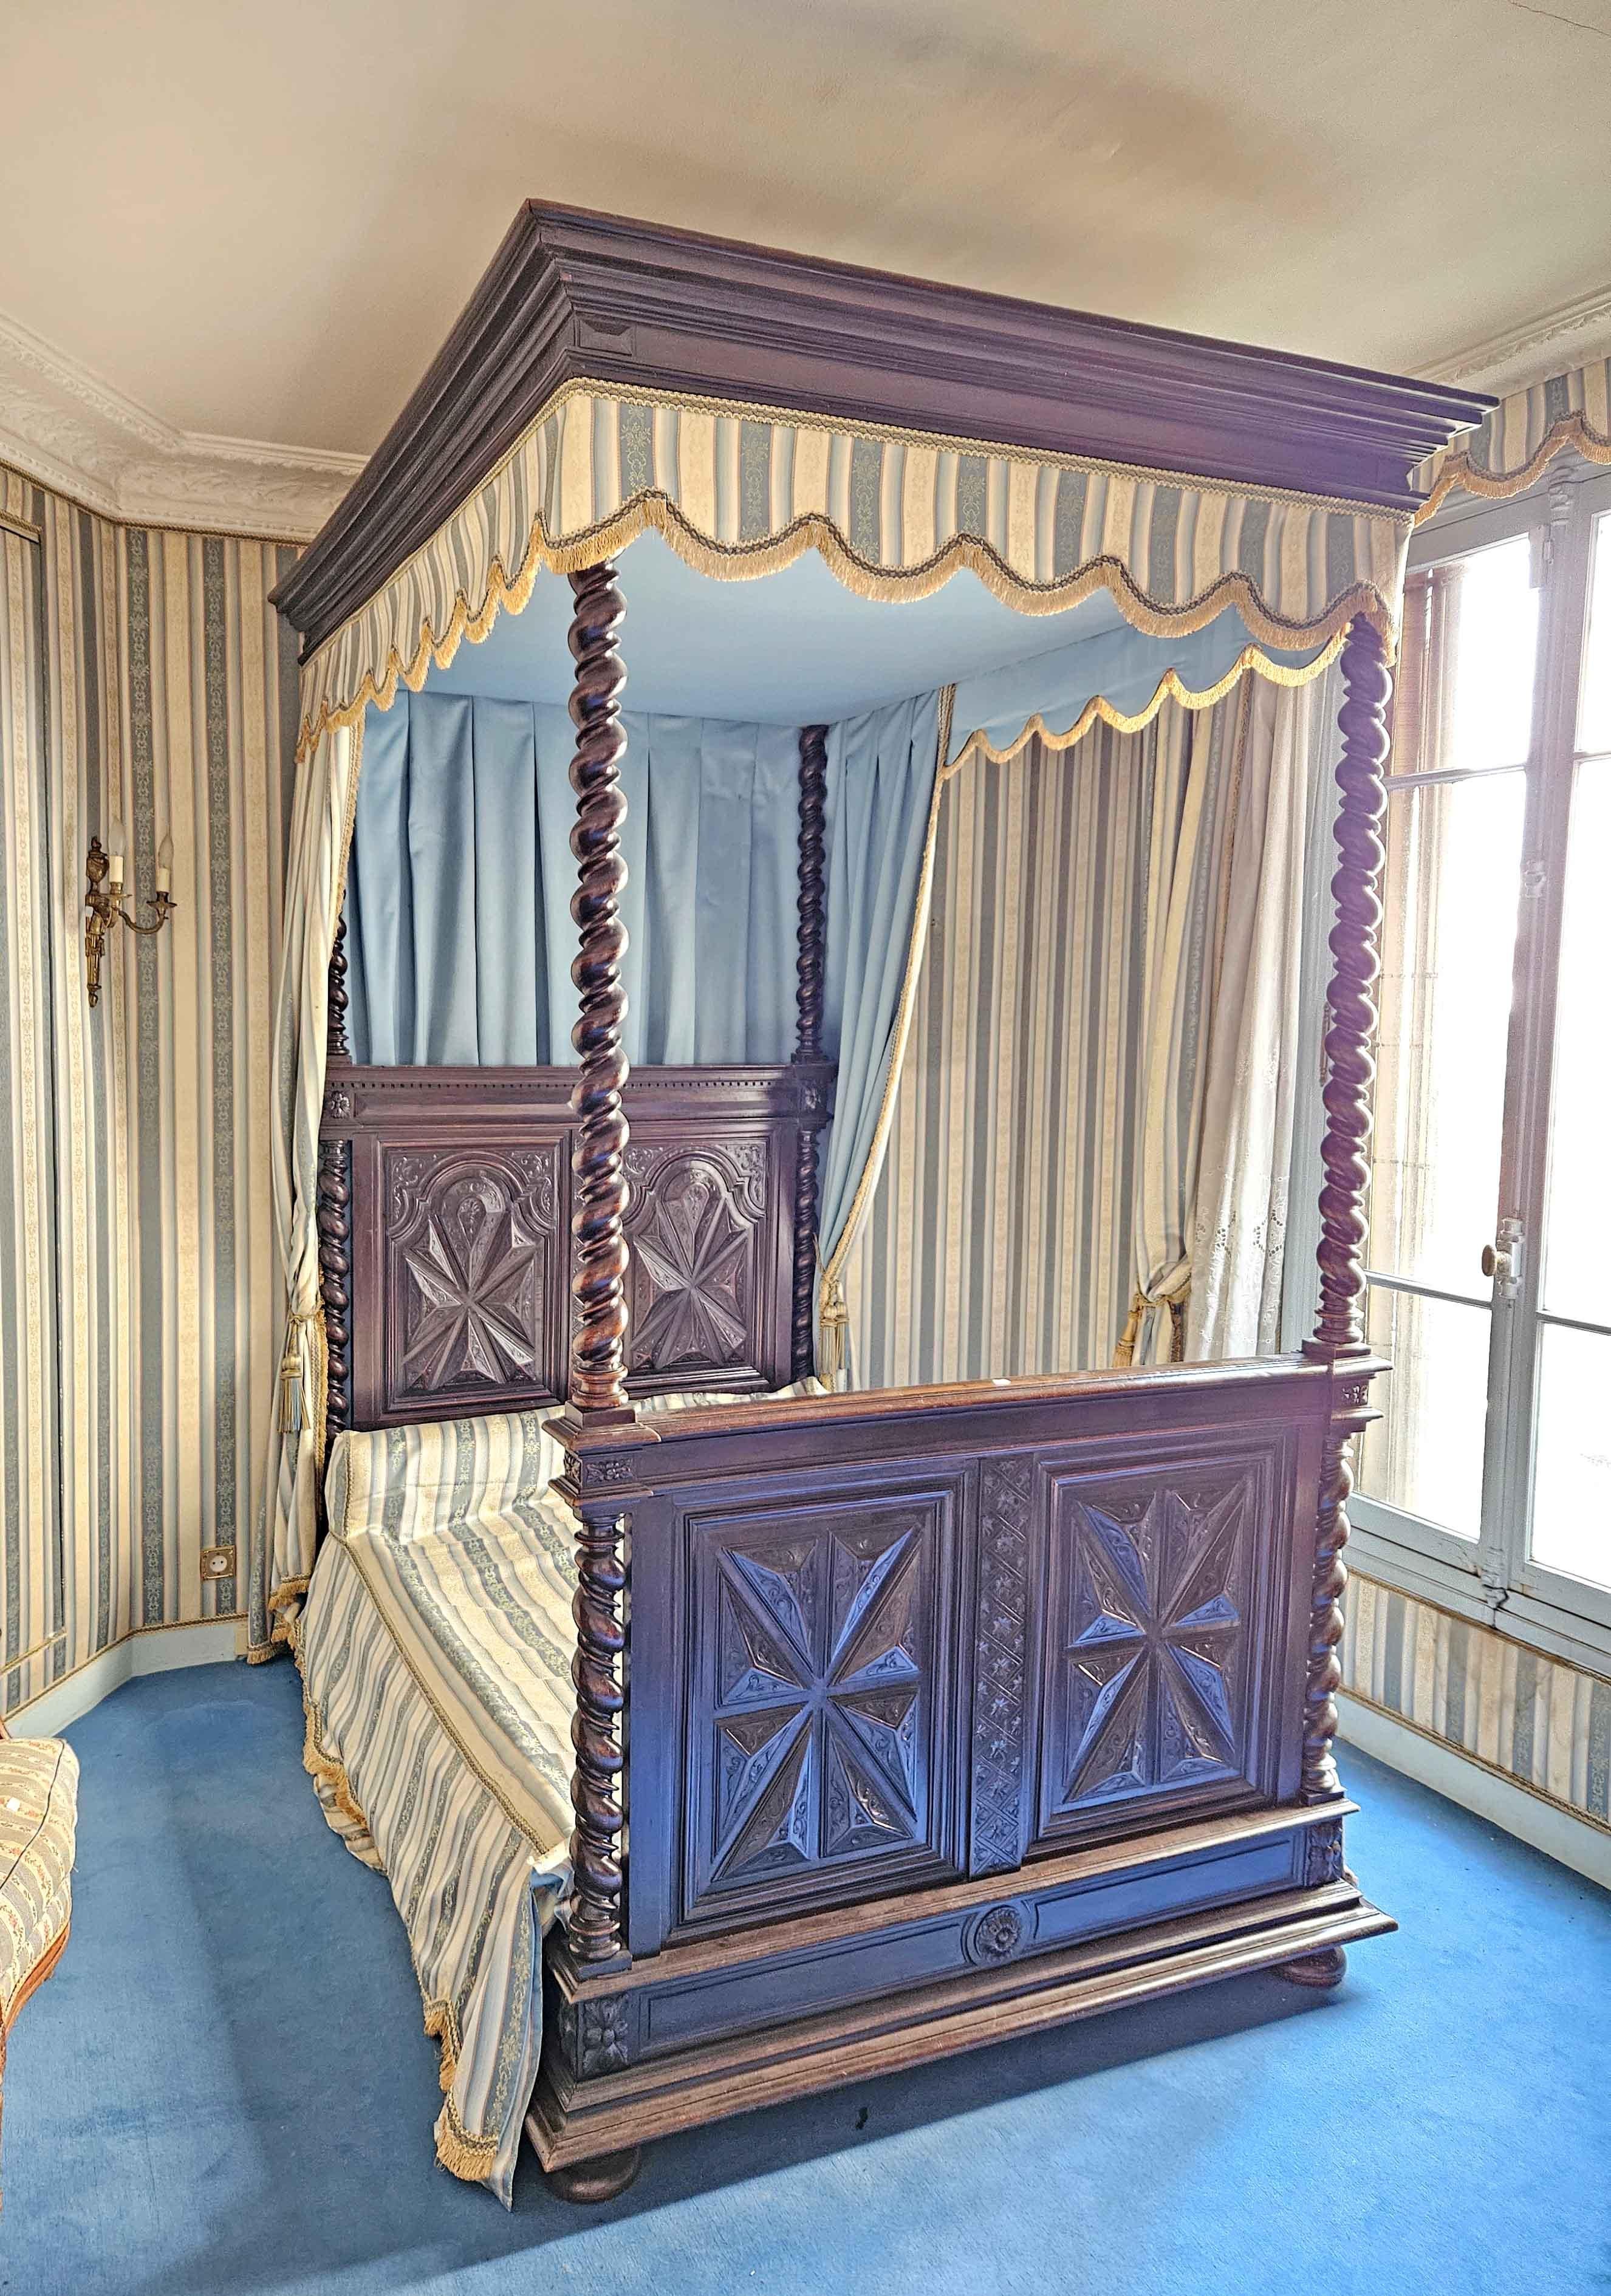 17th century beds